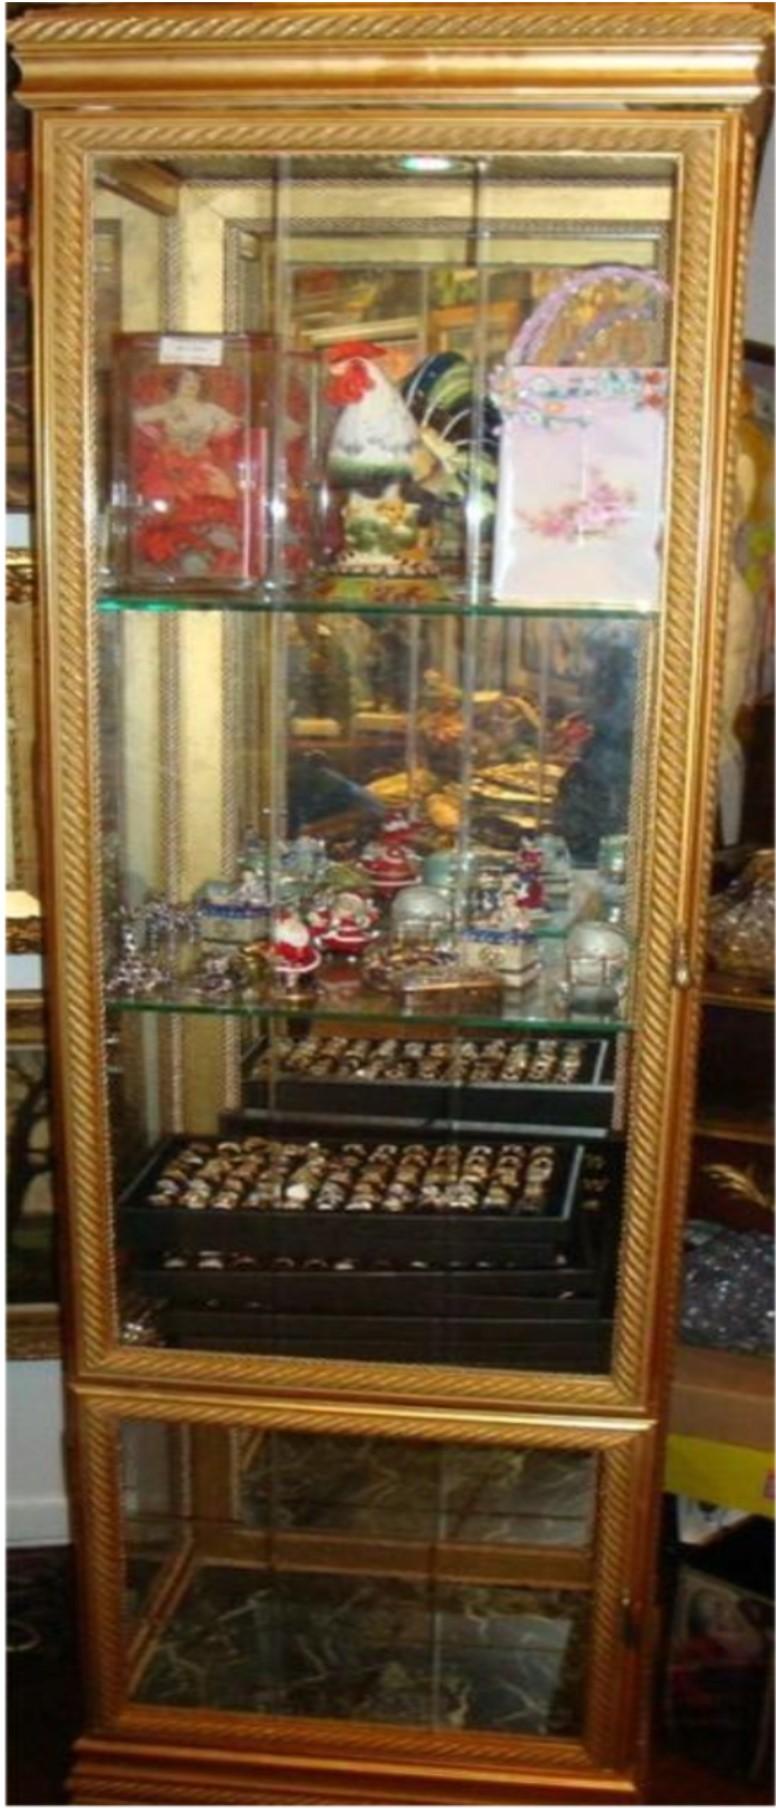 The Following Item we are Offering is a Magnificent Beautiful Hand Carved Beveled Glass  Hand Carved Decorative 2 Door Bottom to Top Gilt Wooden Showcase. Rope Design around Showcase with 3 Led Multi Colored Lighting. Finely detailed and in